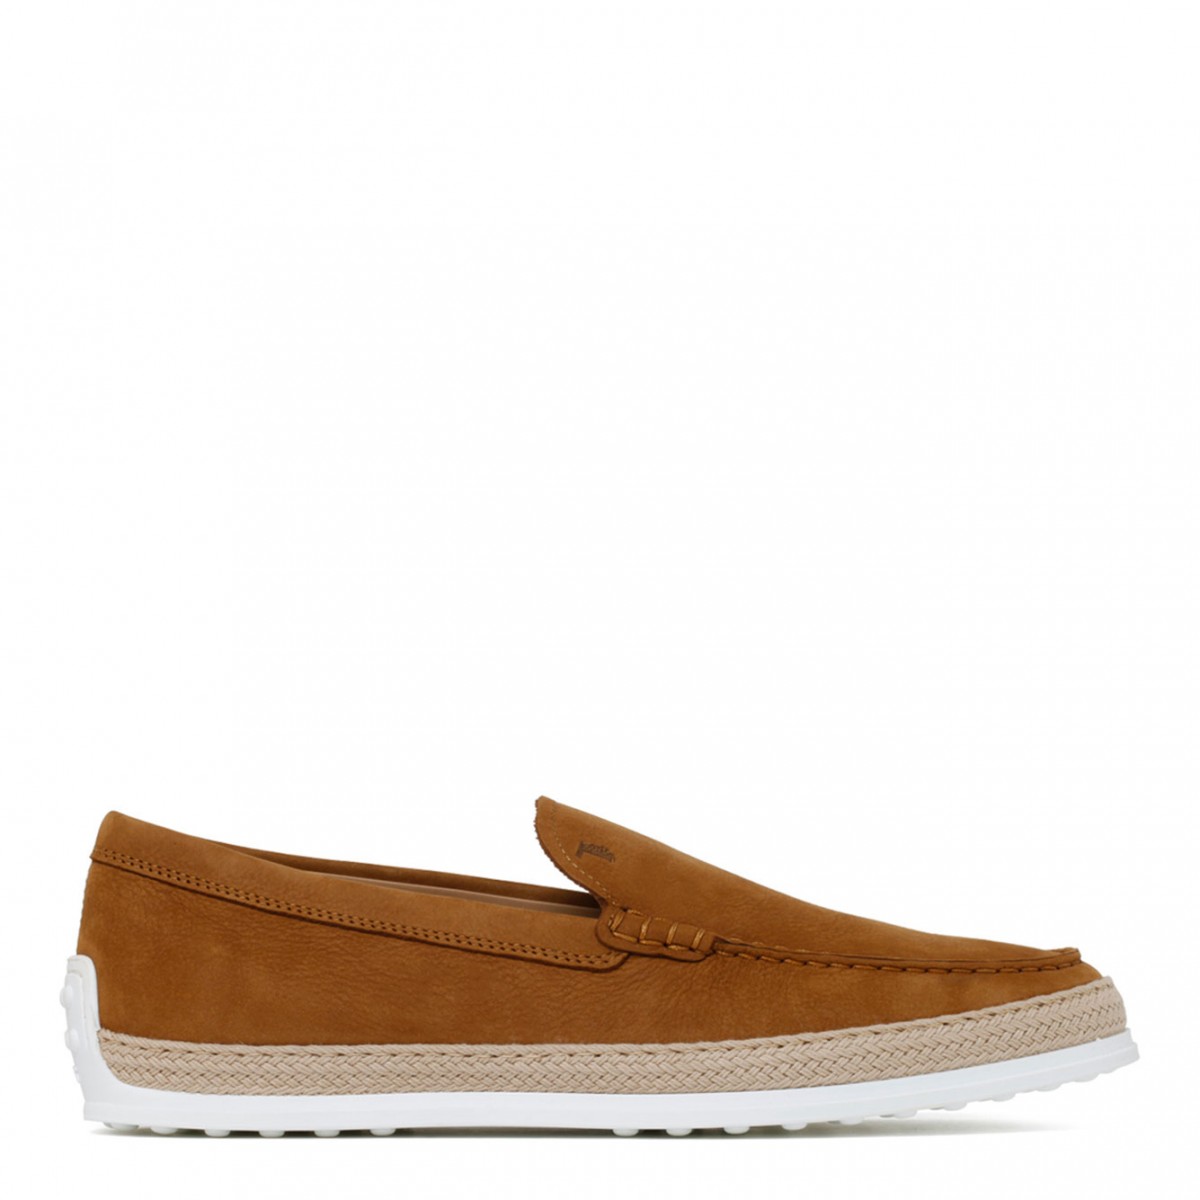 Light Brown Suede Slip On Loafers